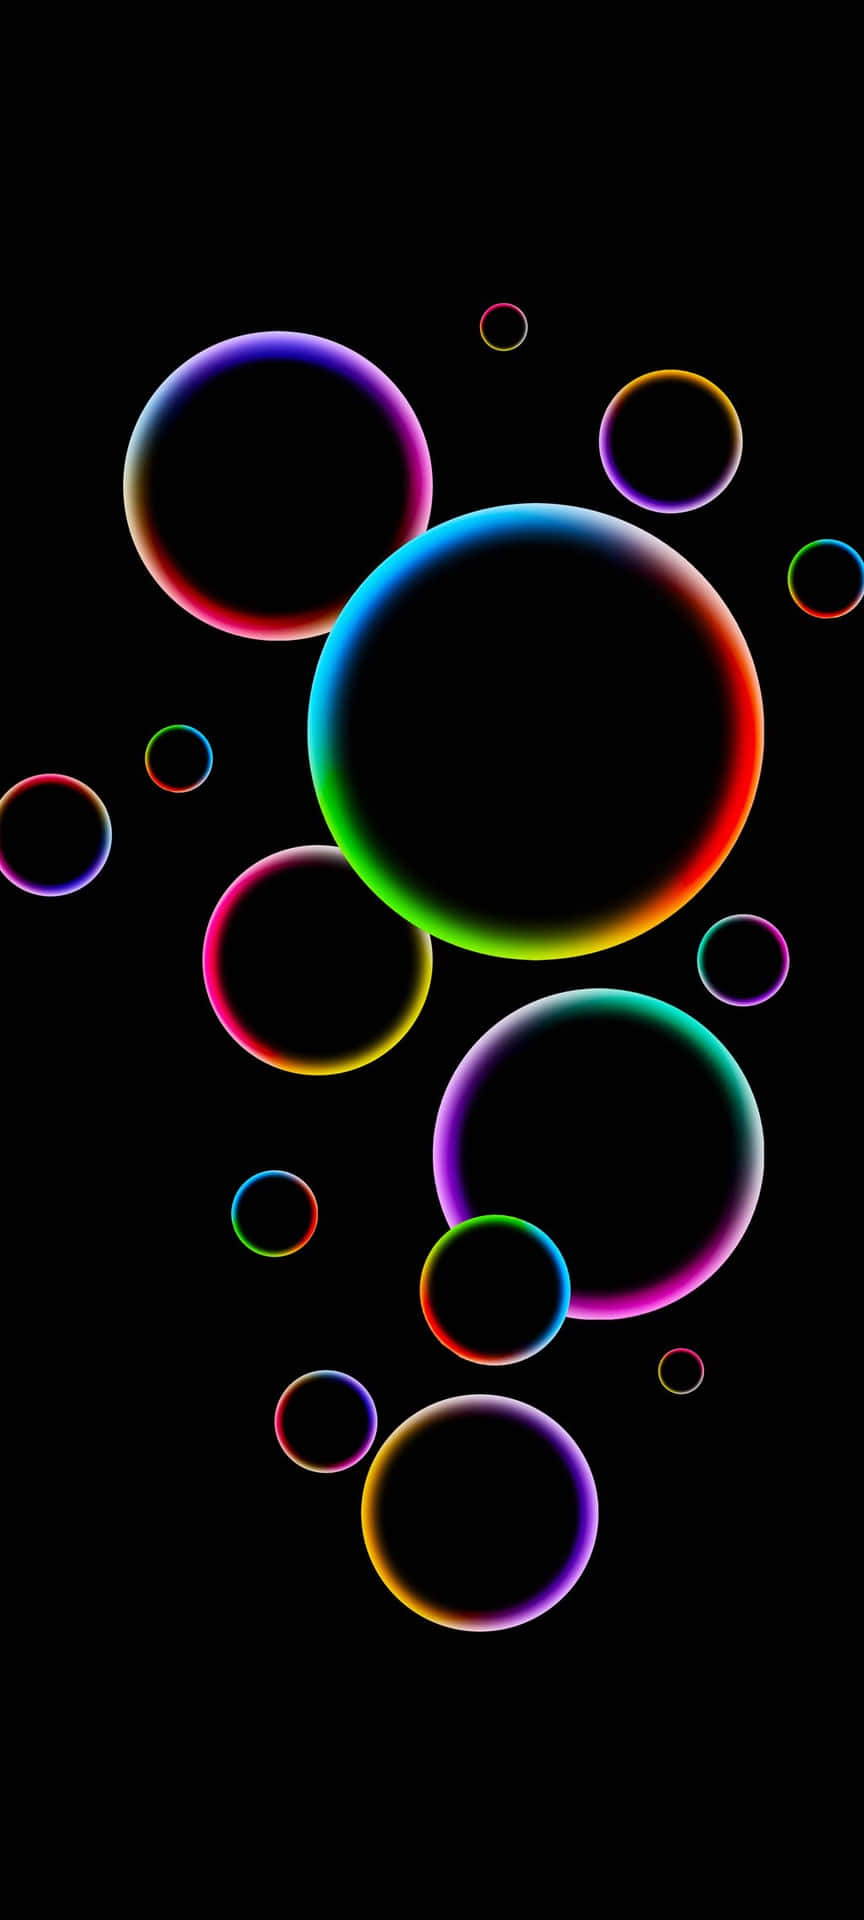 A Black Background With Colorful Circles Wallpaper